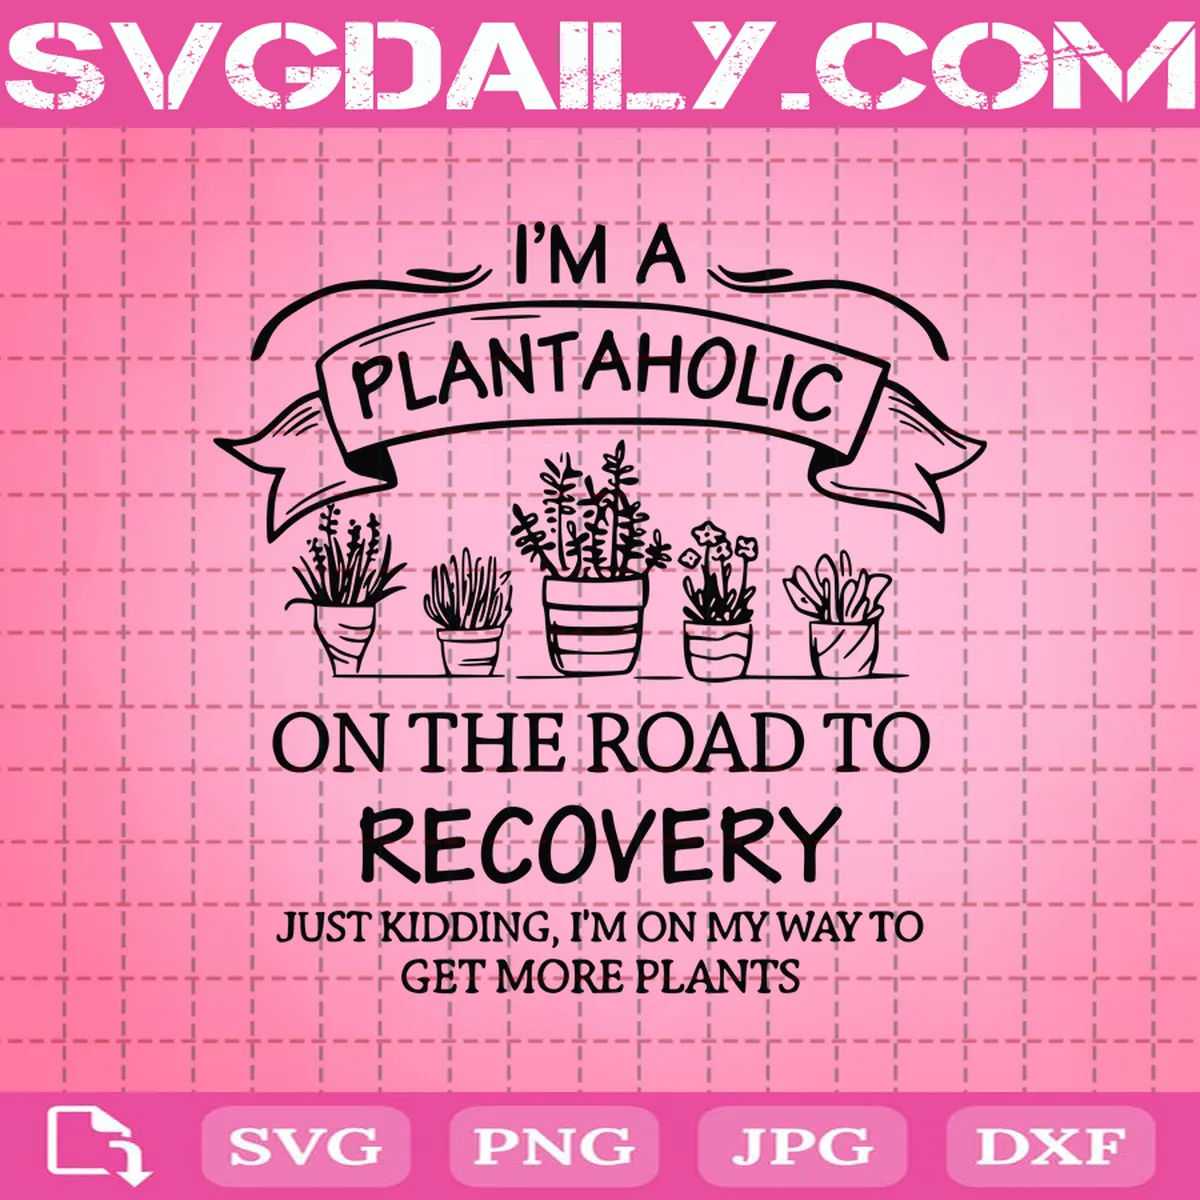 I'm A Plantaholic On The Road To Recovery Svg, Gardening Svg, Planting Svg, Gardener Svg, Plant Lover Svg, Love To Garden Svg